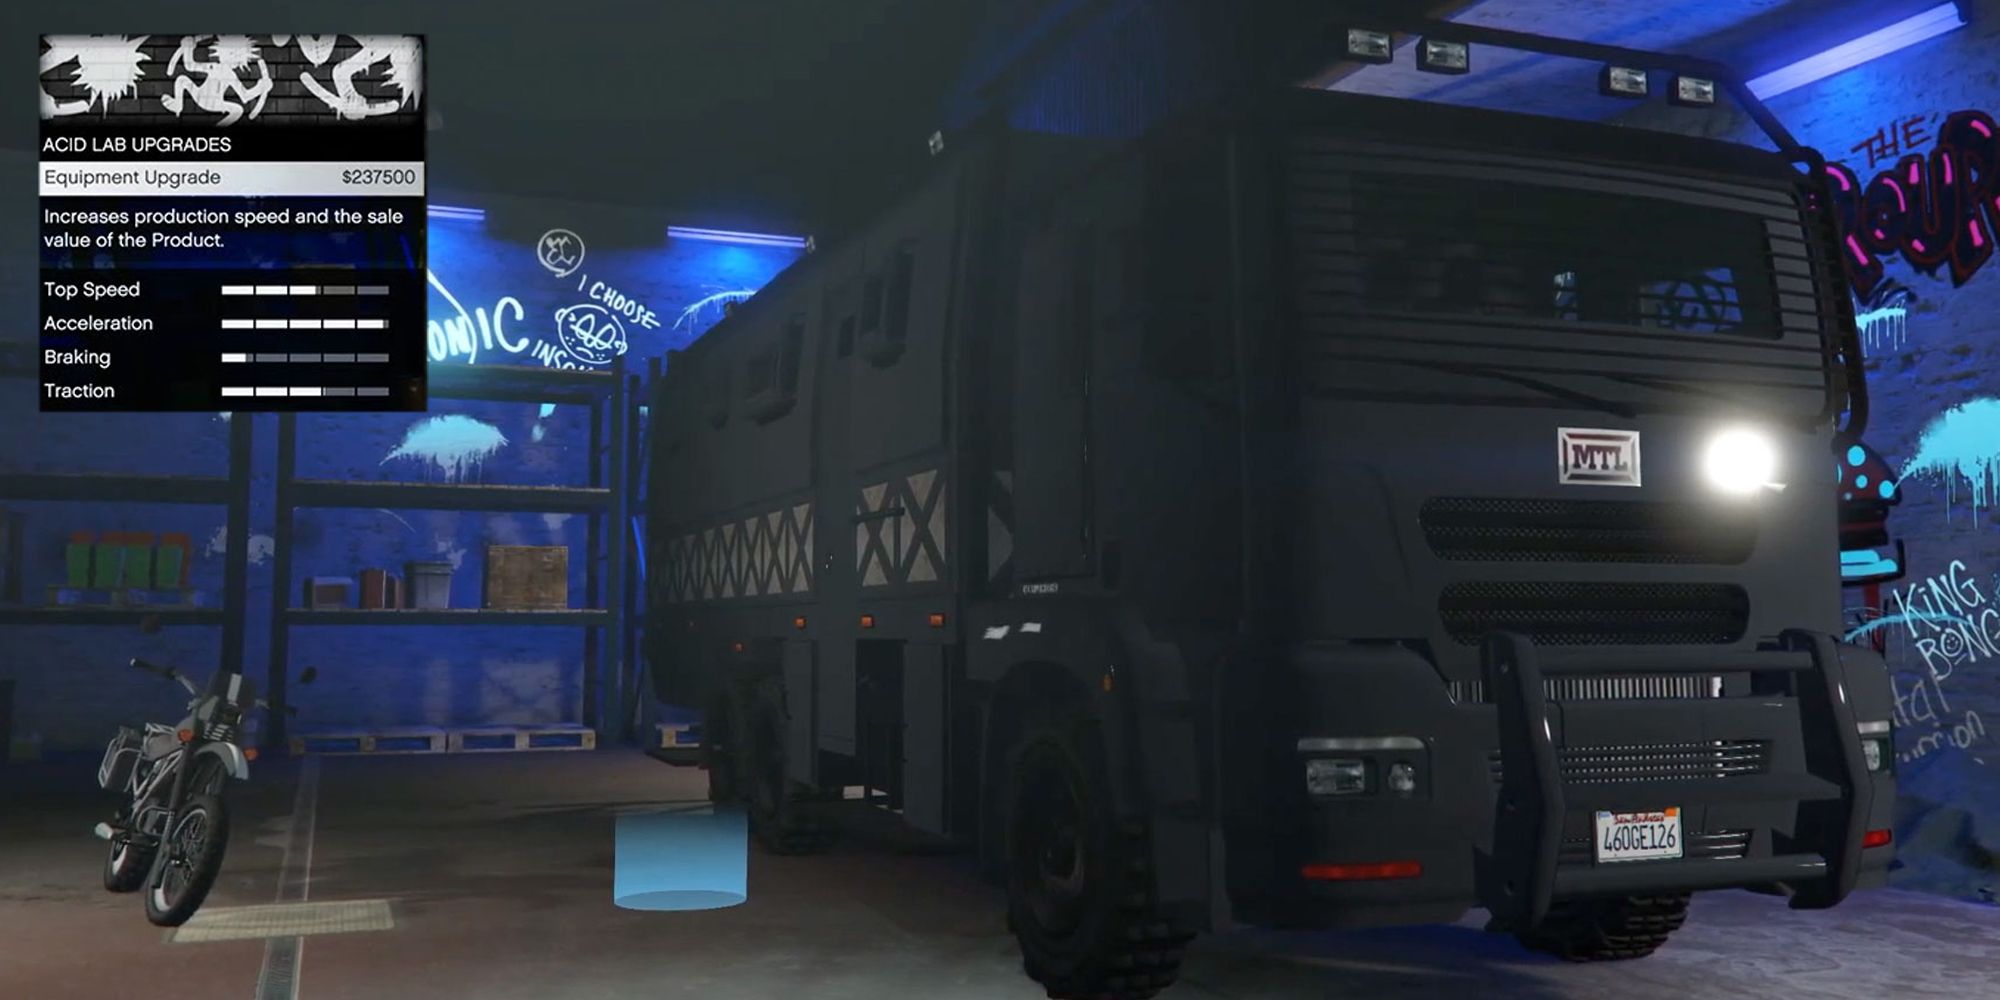 The image shows the Acid Lab truck in the Freakshop in Grand Theft Auto Online, with the Equipment Upgrade option box on the left side.